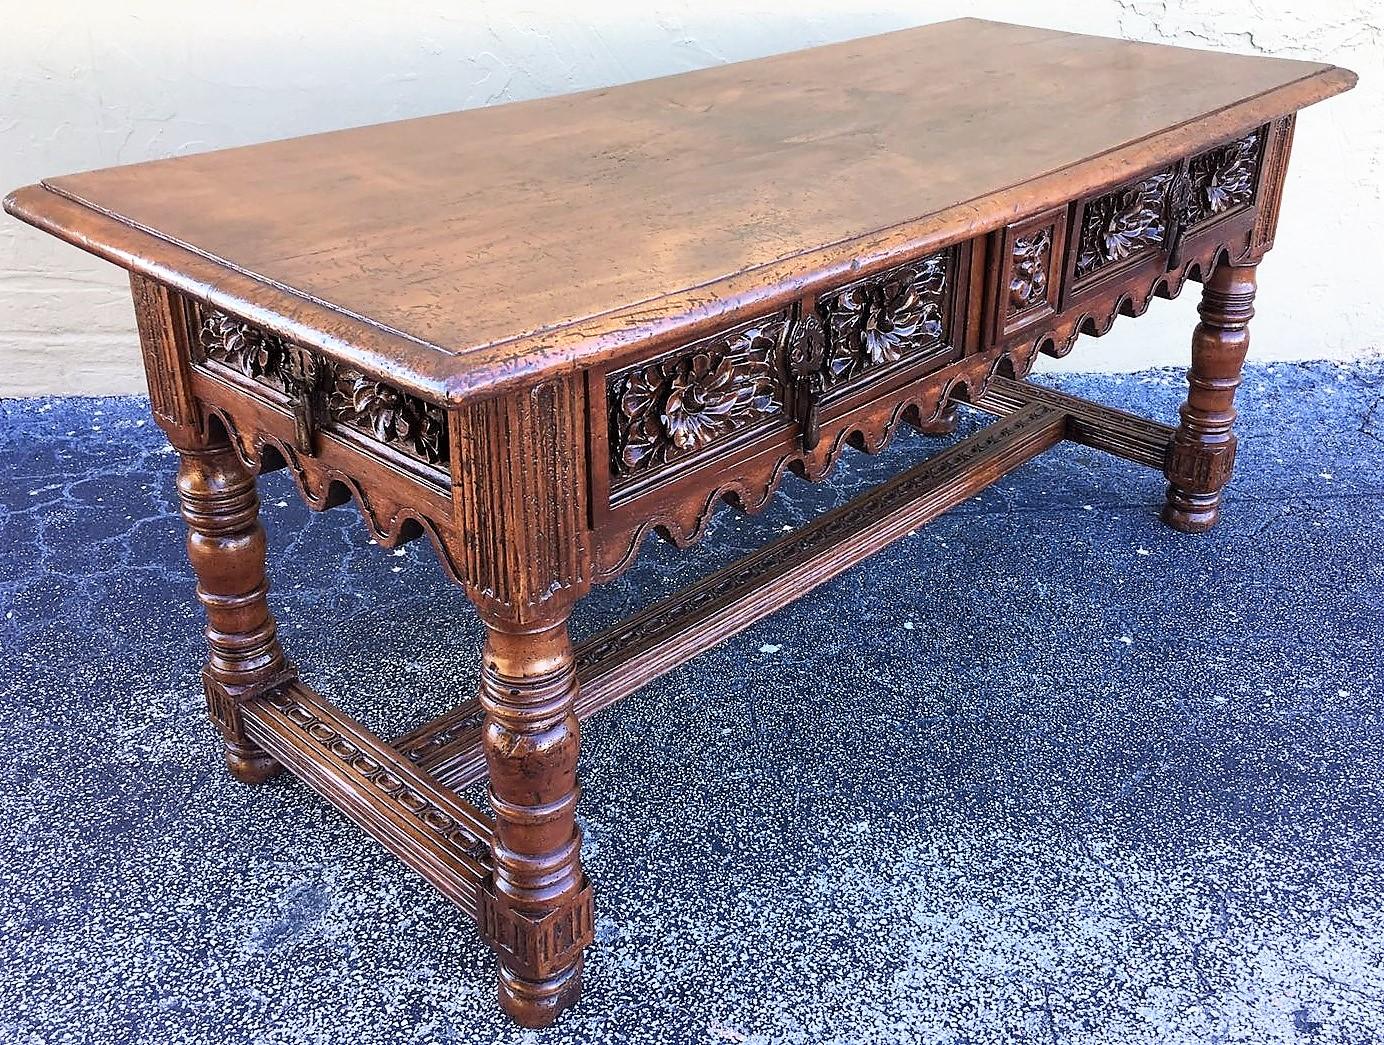 Hand-Carved 17th Century Spanish Baroque Carved Walnut, Refectory Console Table, Masterpiece